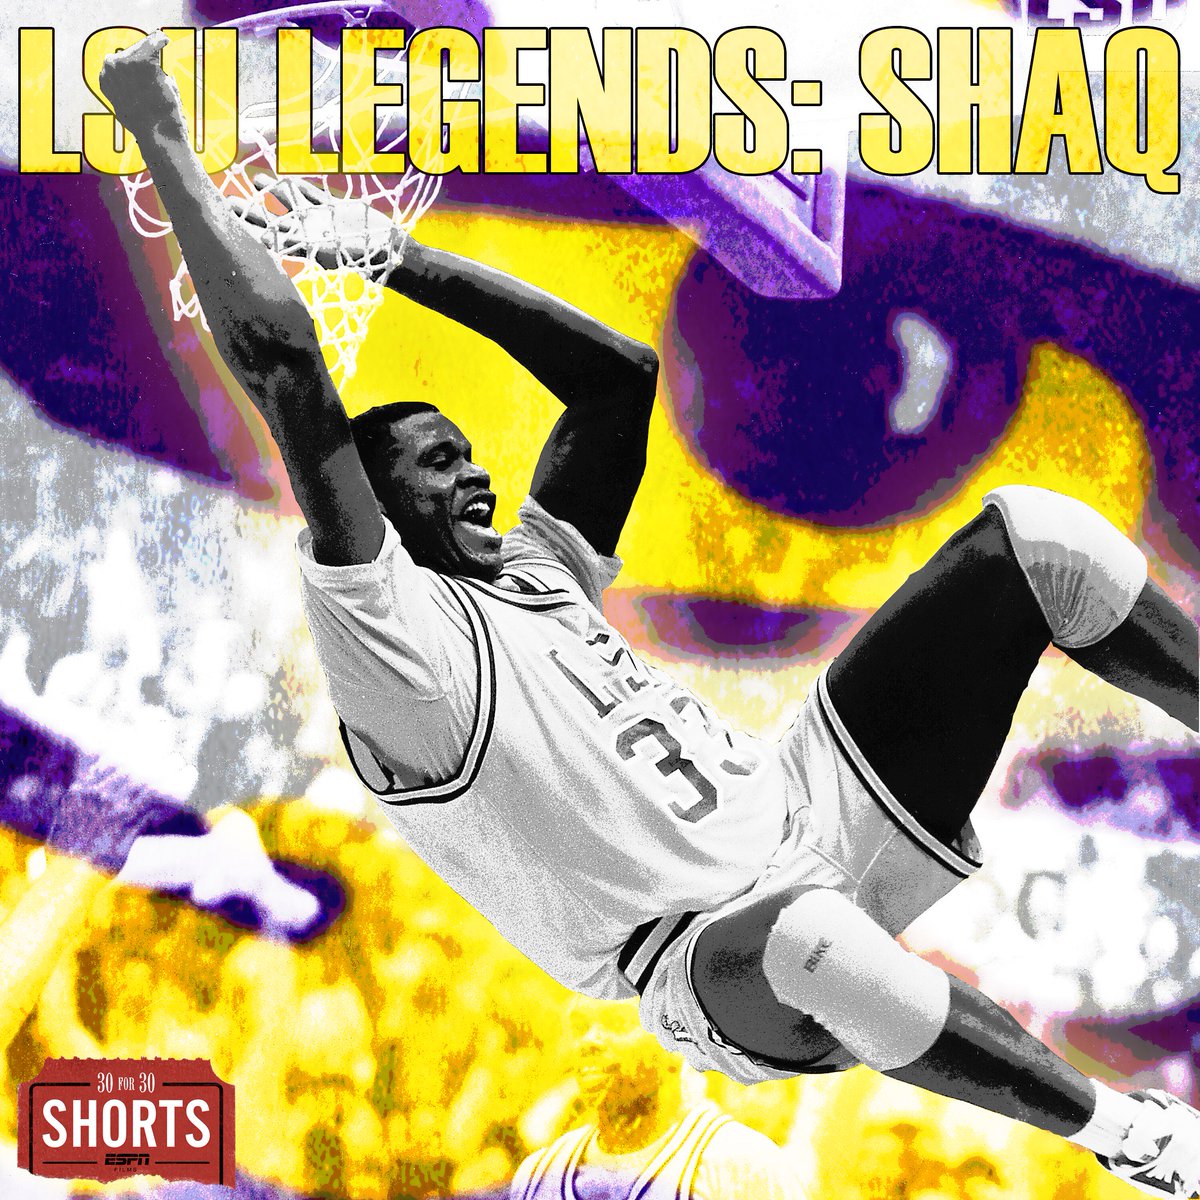 RT @30for30: Pistol Pete, @SHAQ and Rudy Macklin are all @lsu legends. #NoKinToMe tells Macklin's story! https://t.co/OmpaD5g3z1 https://t.…